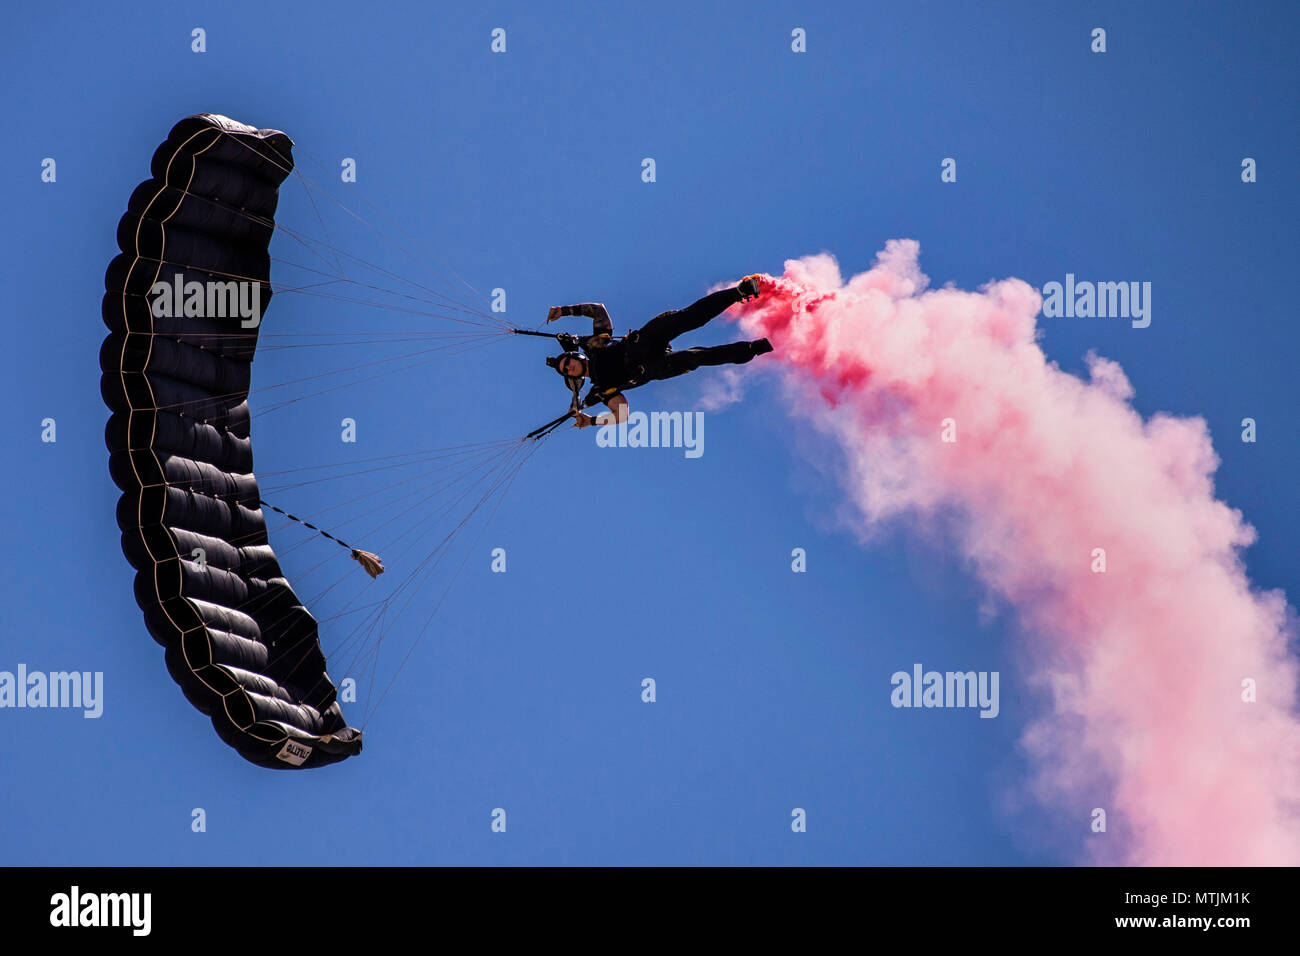 A member of the U.S. Special Operations Command Para-Commandos parachutes down during the Cannon Air Show, Space and Tech Fest at Cannon Air Force Base, N.M., May 26, 2018. The Para-Commandos are the only DoD Joint Service demonstration team consisting of members from every Military Service in SOCOM. (U.S. Air Force photo by Senior Airman Luke Kitterman/Released) Stock Photo